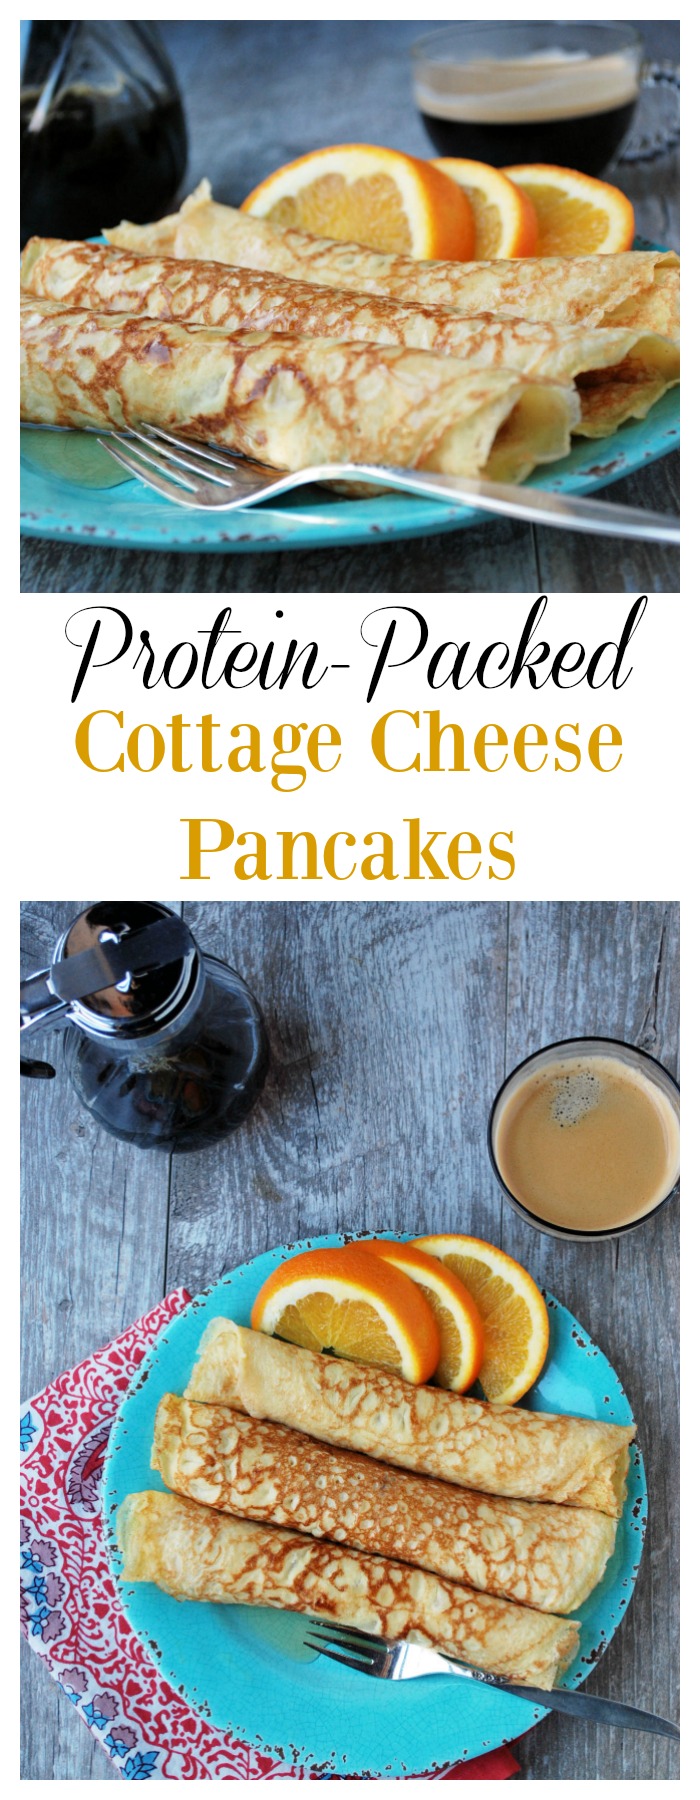 Protein Packed Cottage Cheese Pancakes recipe #cleaneatingpancakes #healthybreakfast #proteinpancakes #pancakes via @Ameessavorydish